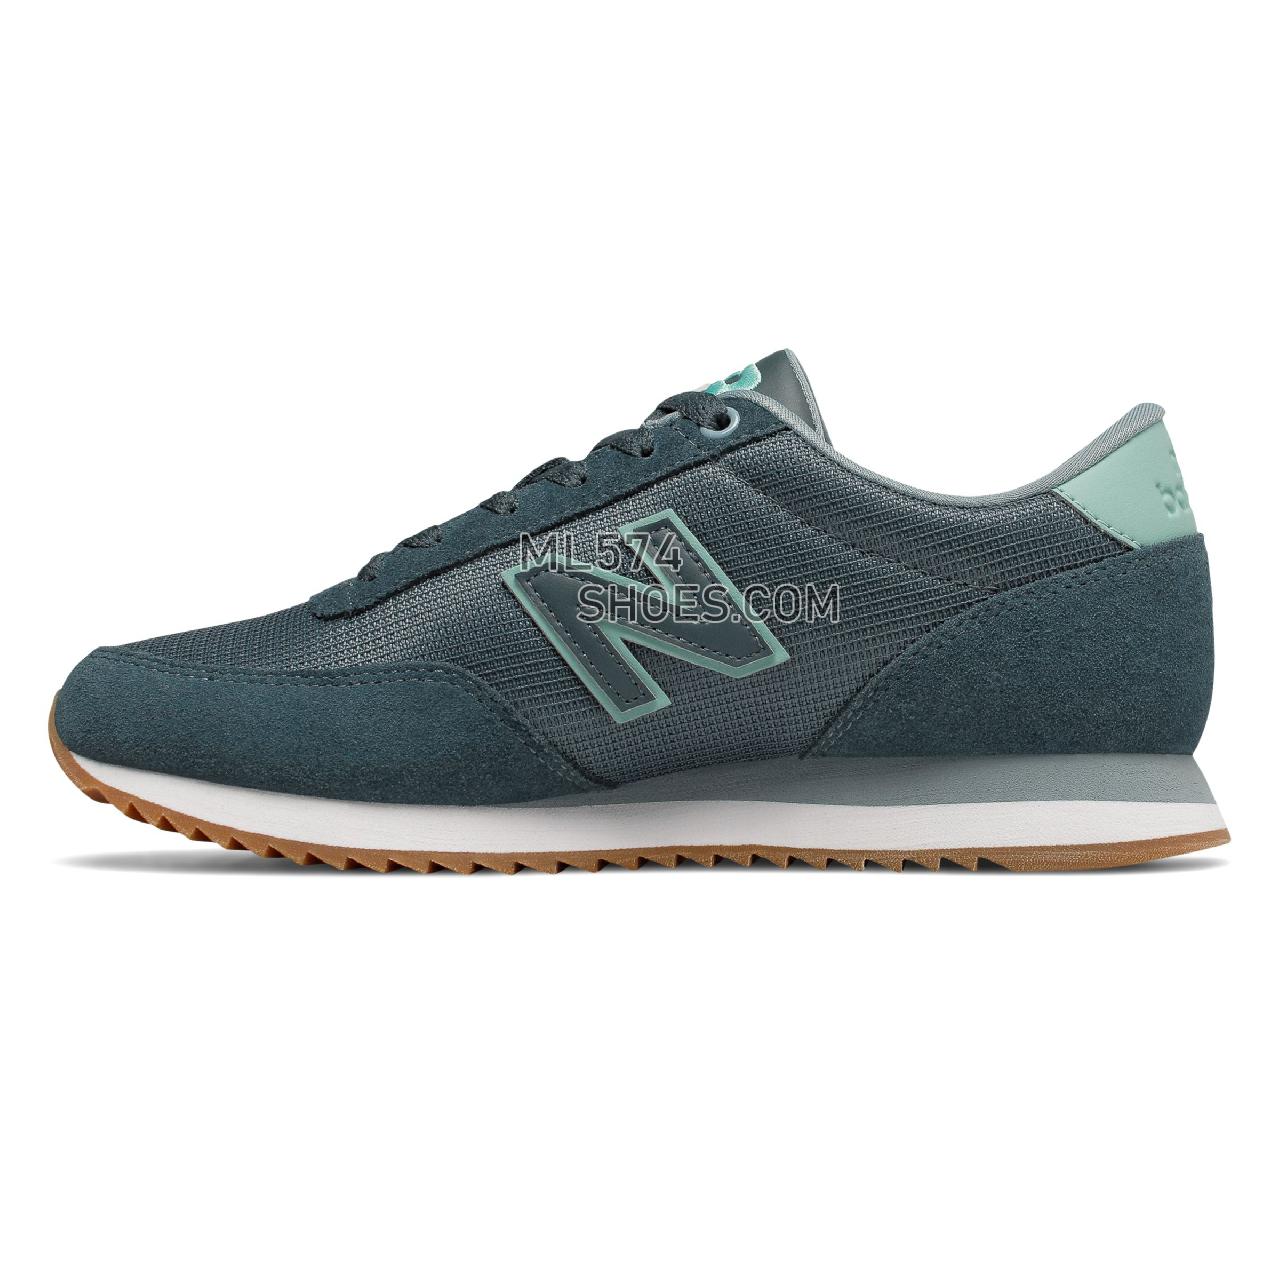 New Balance 501 - Women's 501 - Classic Petrol with Mineral Sage - WZ501MSC